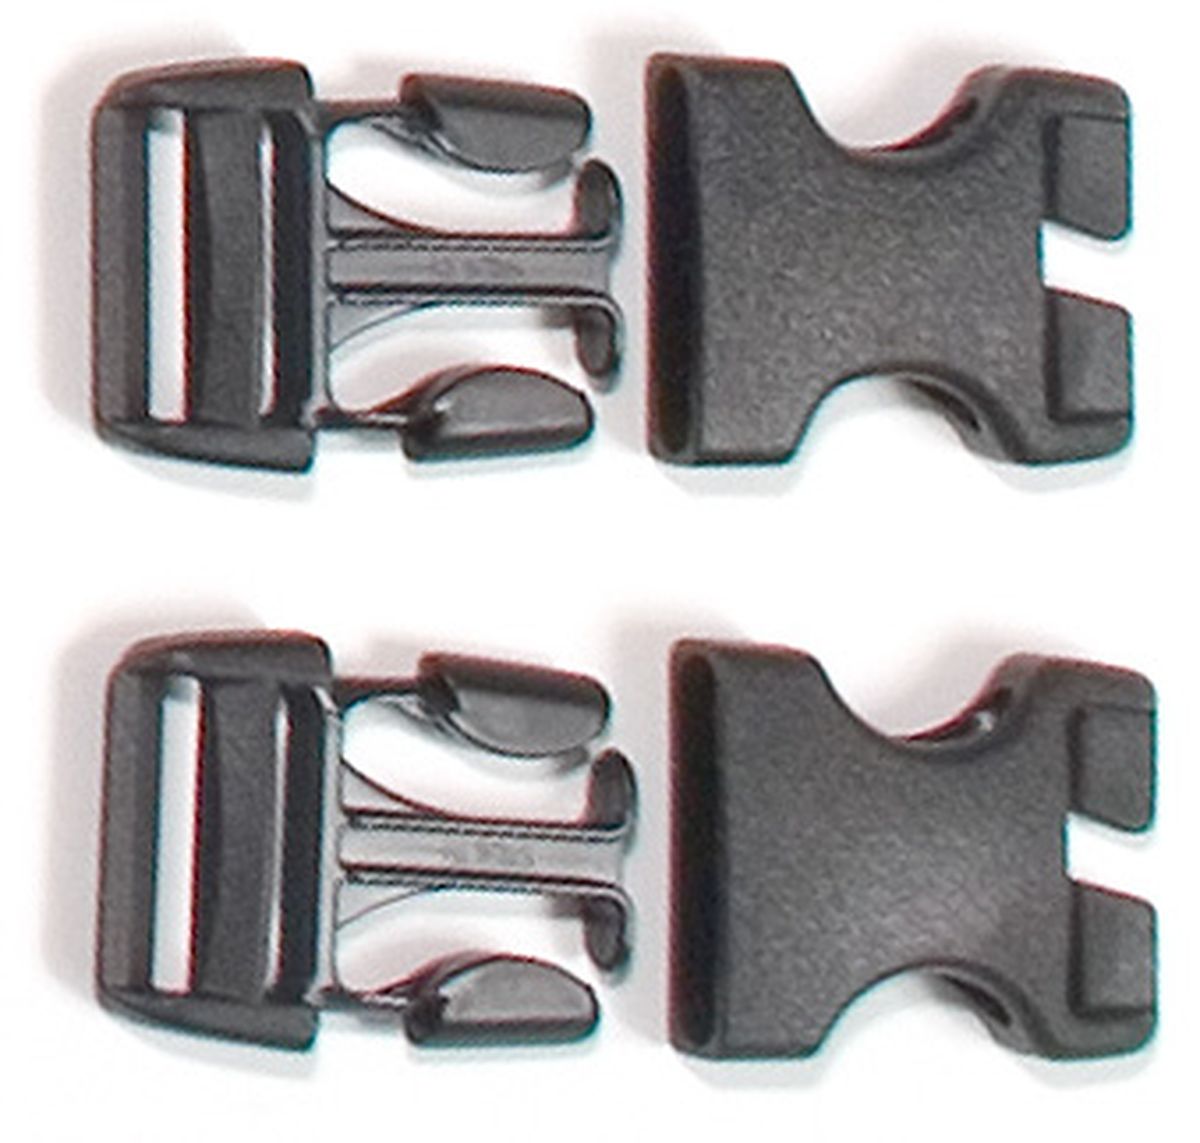 Side-release buckle Stealth, 25mm